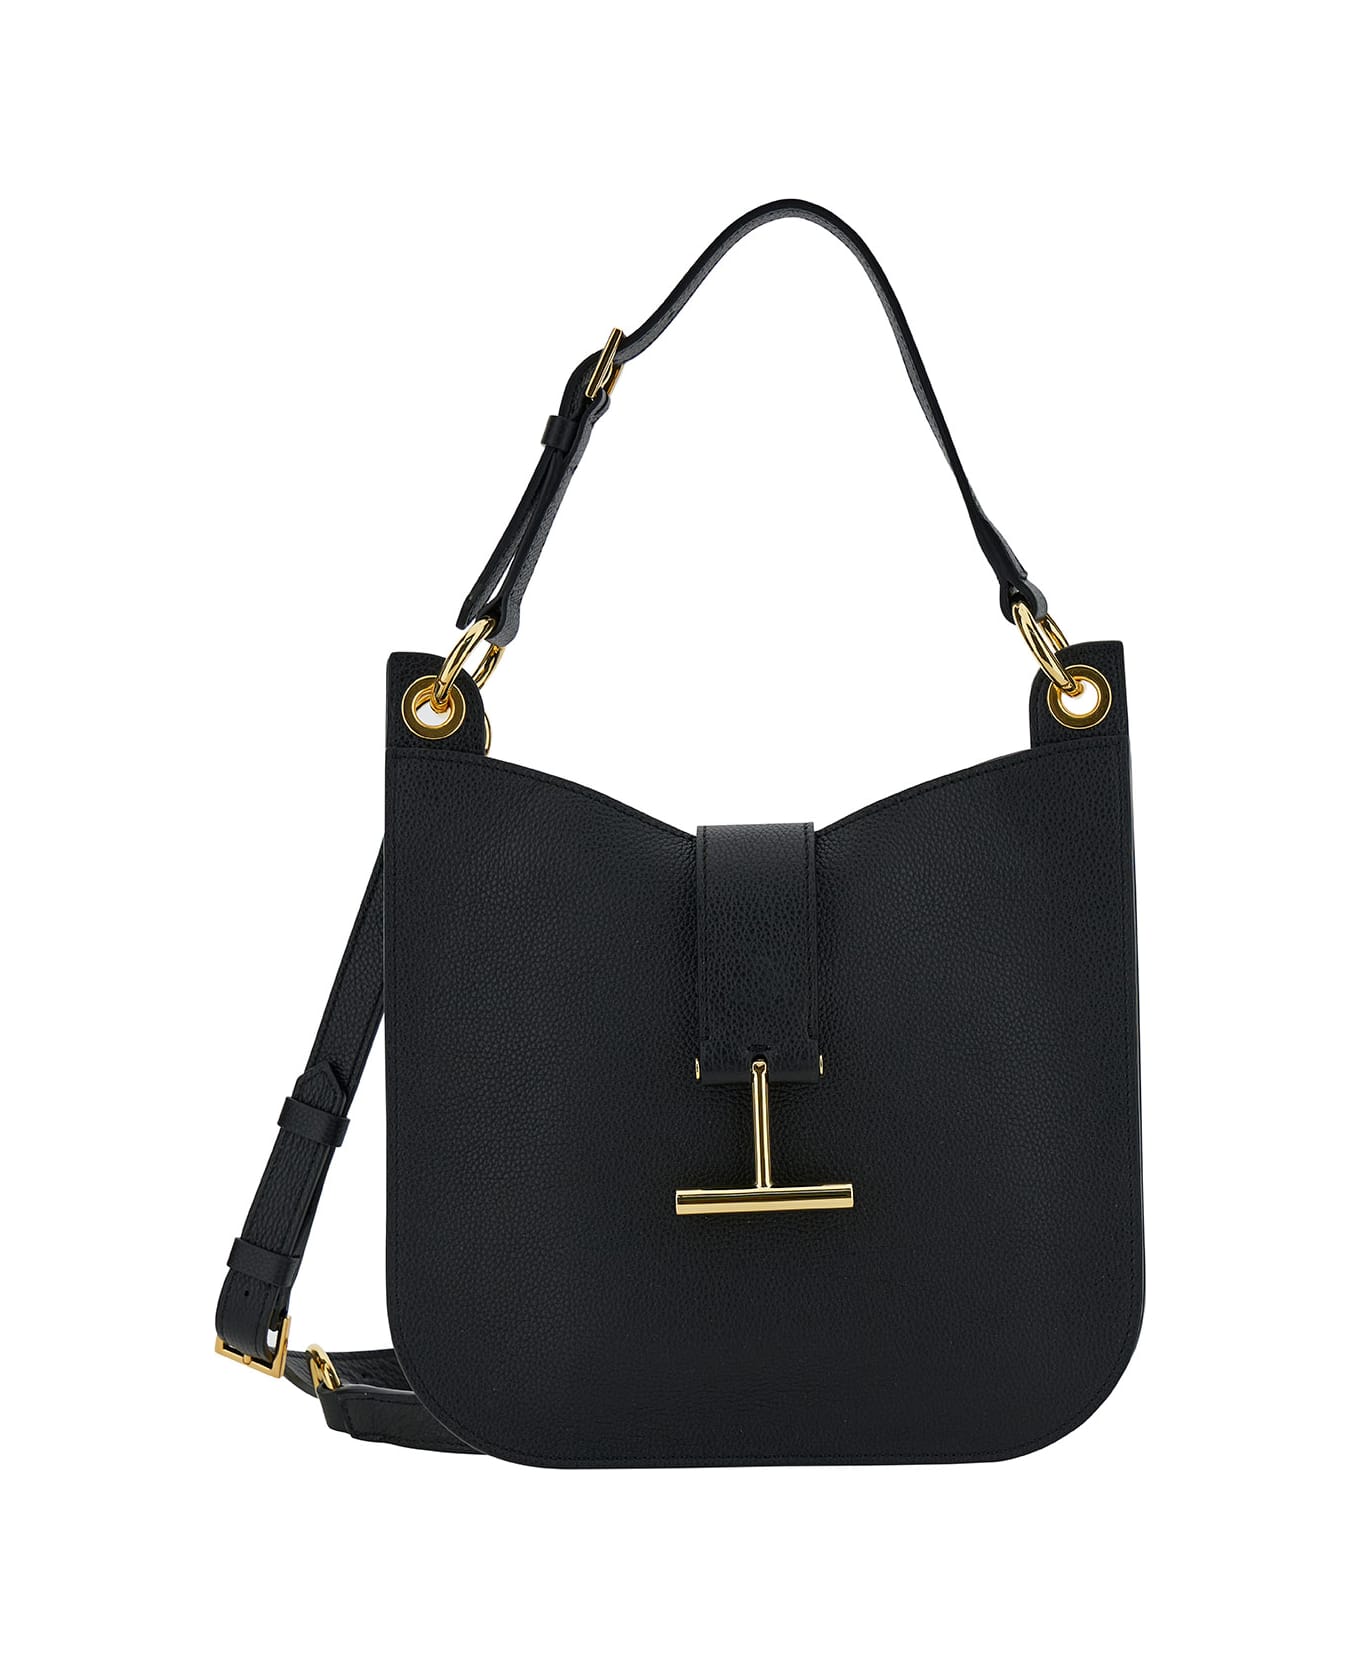 Tom Ford 'tara' Black Handbag With T Signature Detail In Grainy Leather Woman - Black